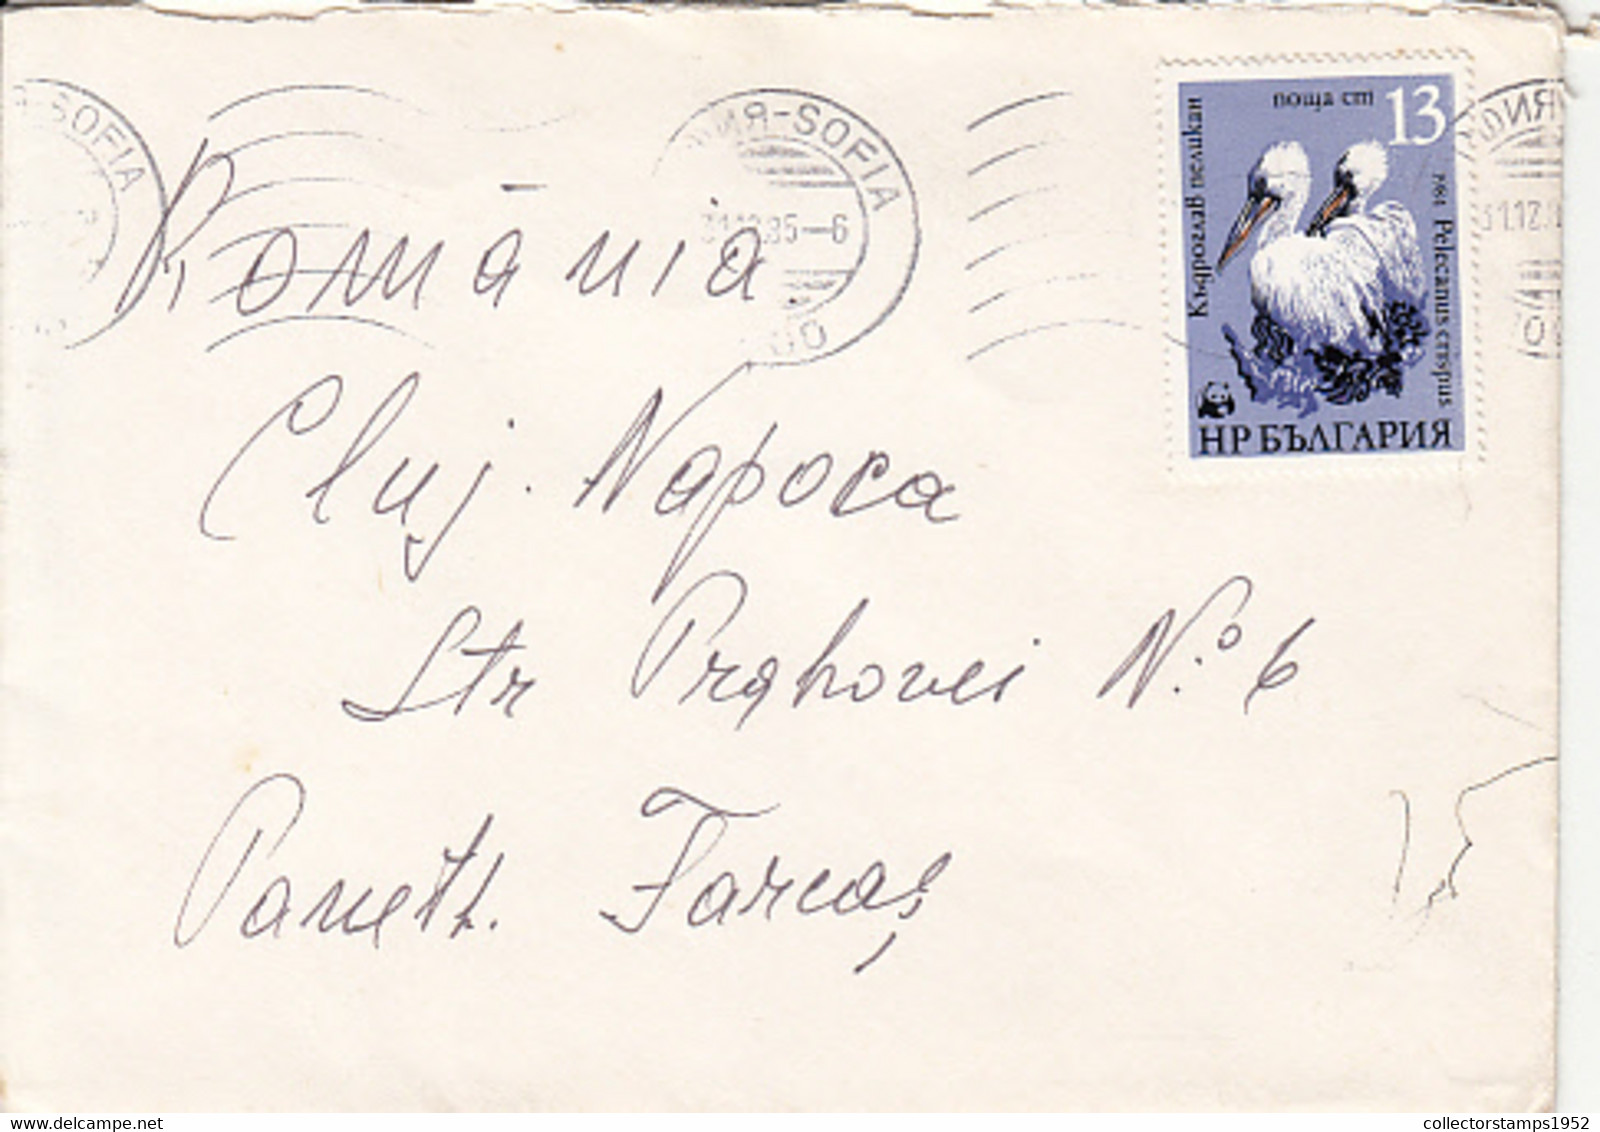 91274- PELICAN STAMP ON COVER, 1985, BULGARIA - Covers & Documents